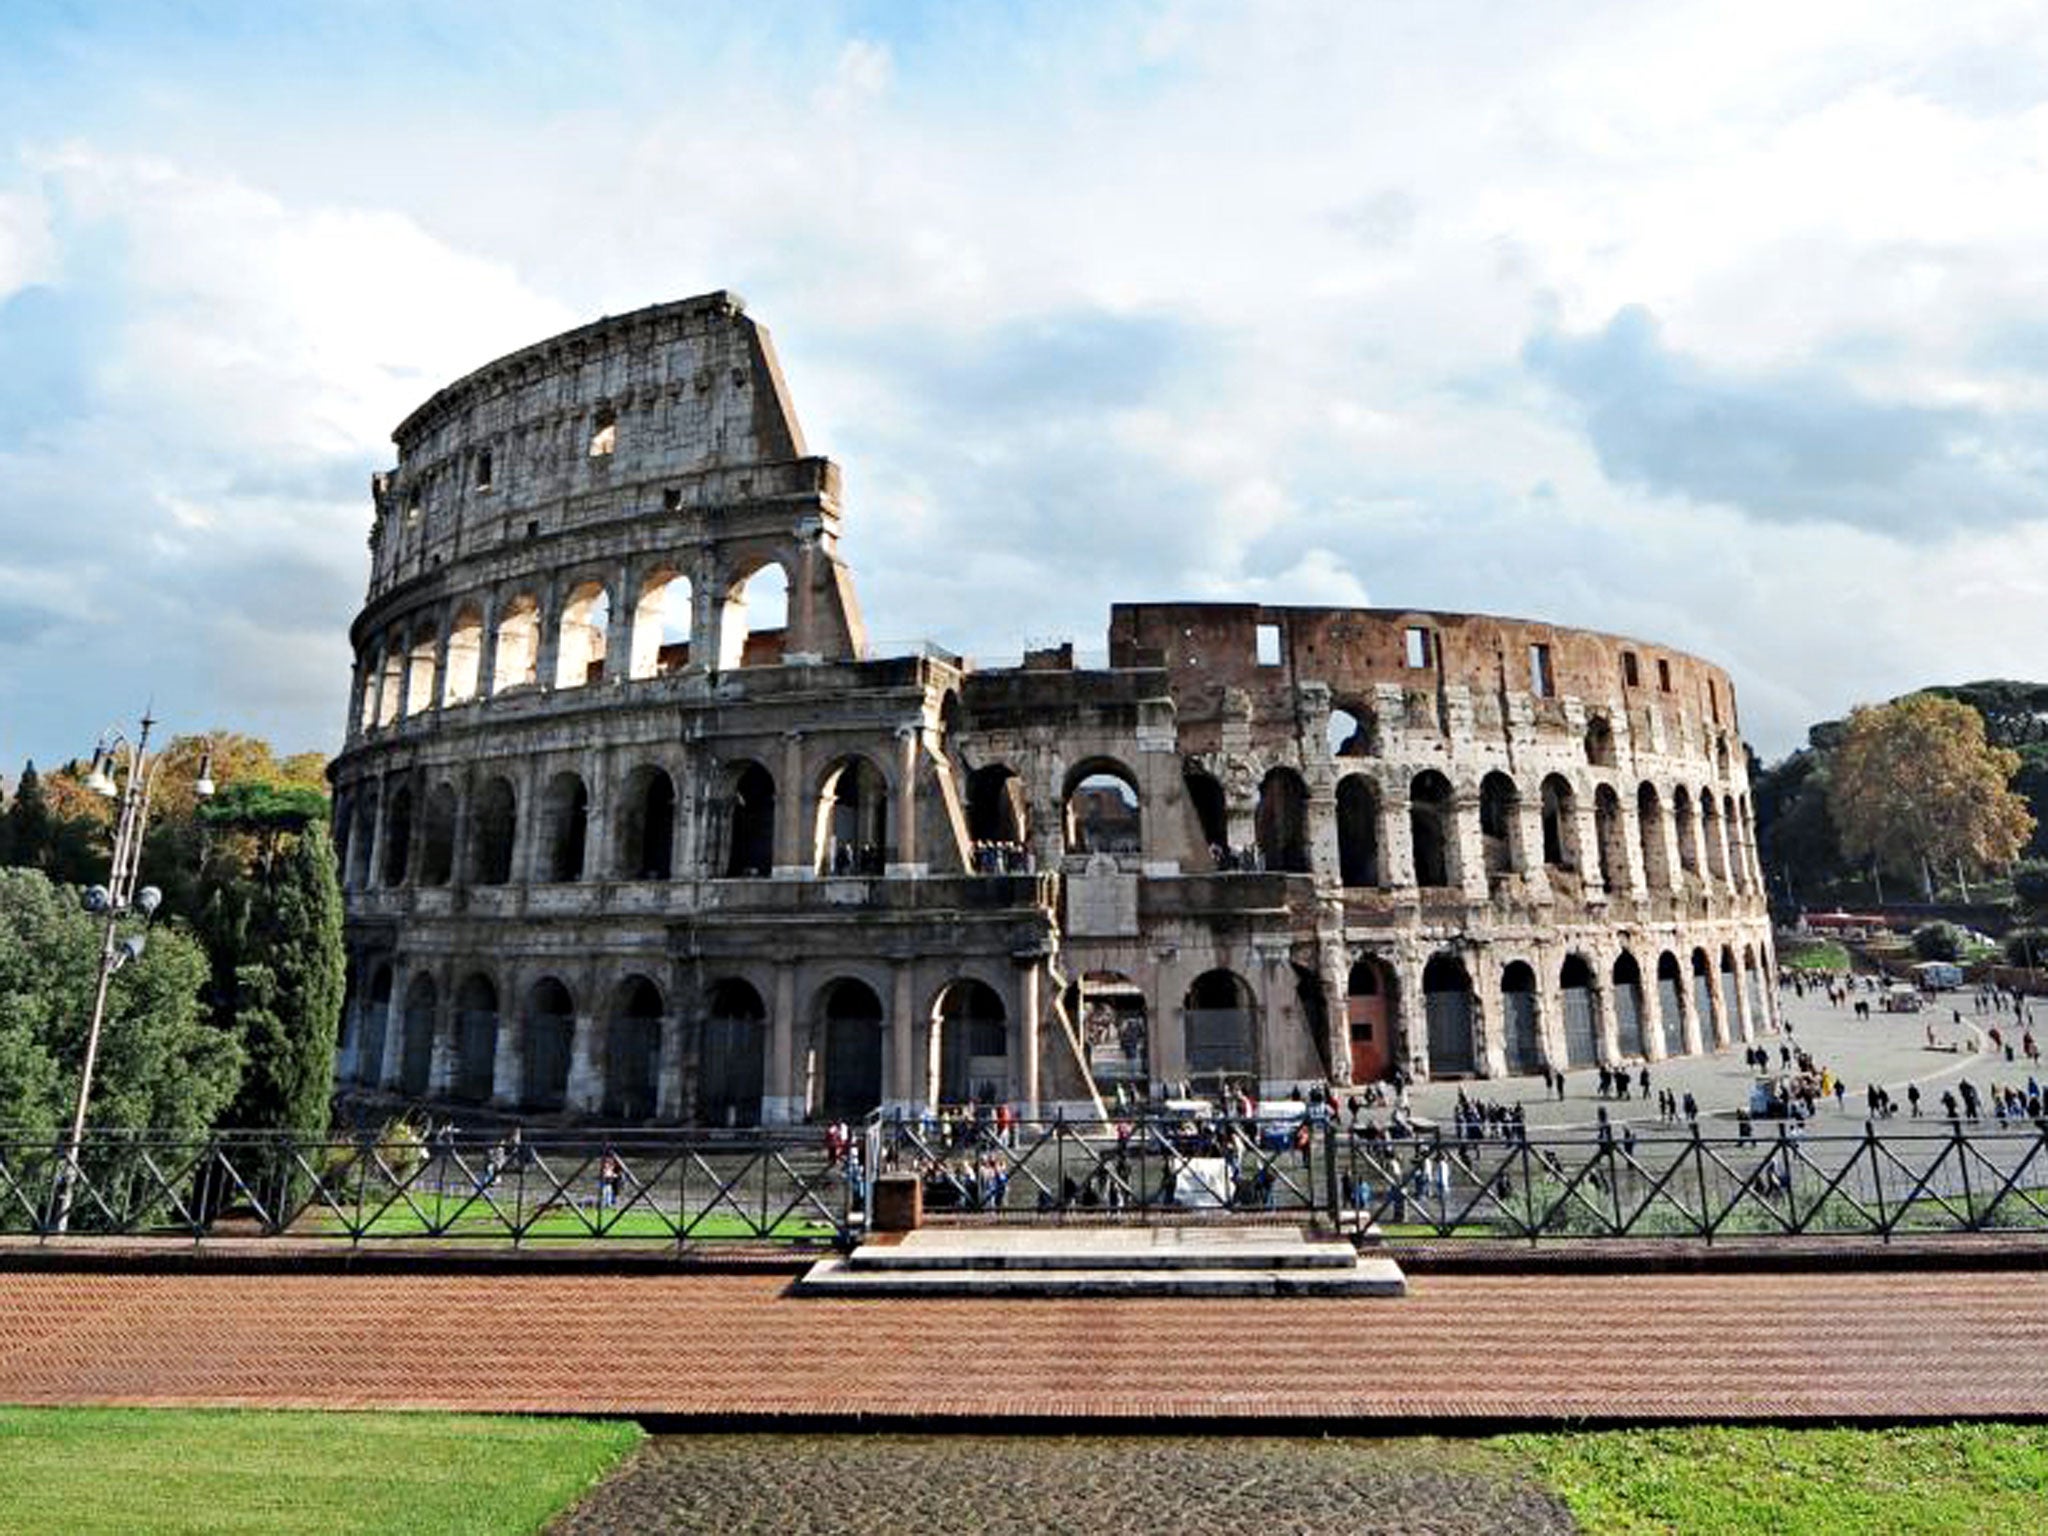 Amazing place: the Colosseum in Rome